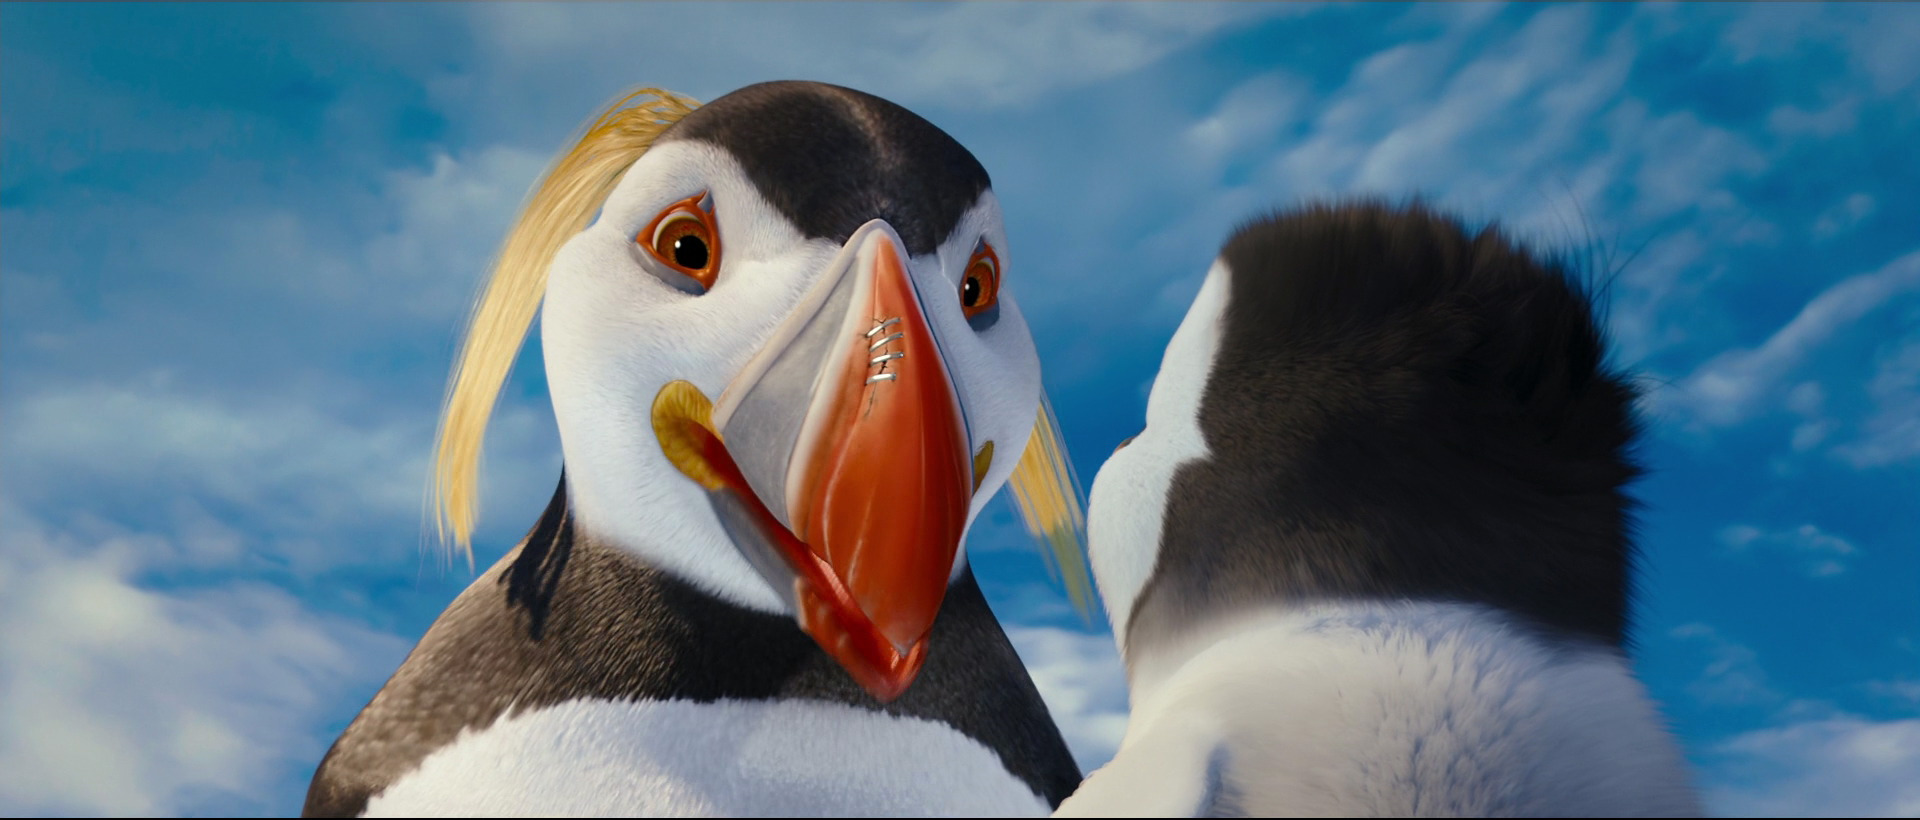 two penguins movie